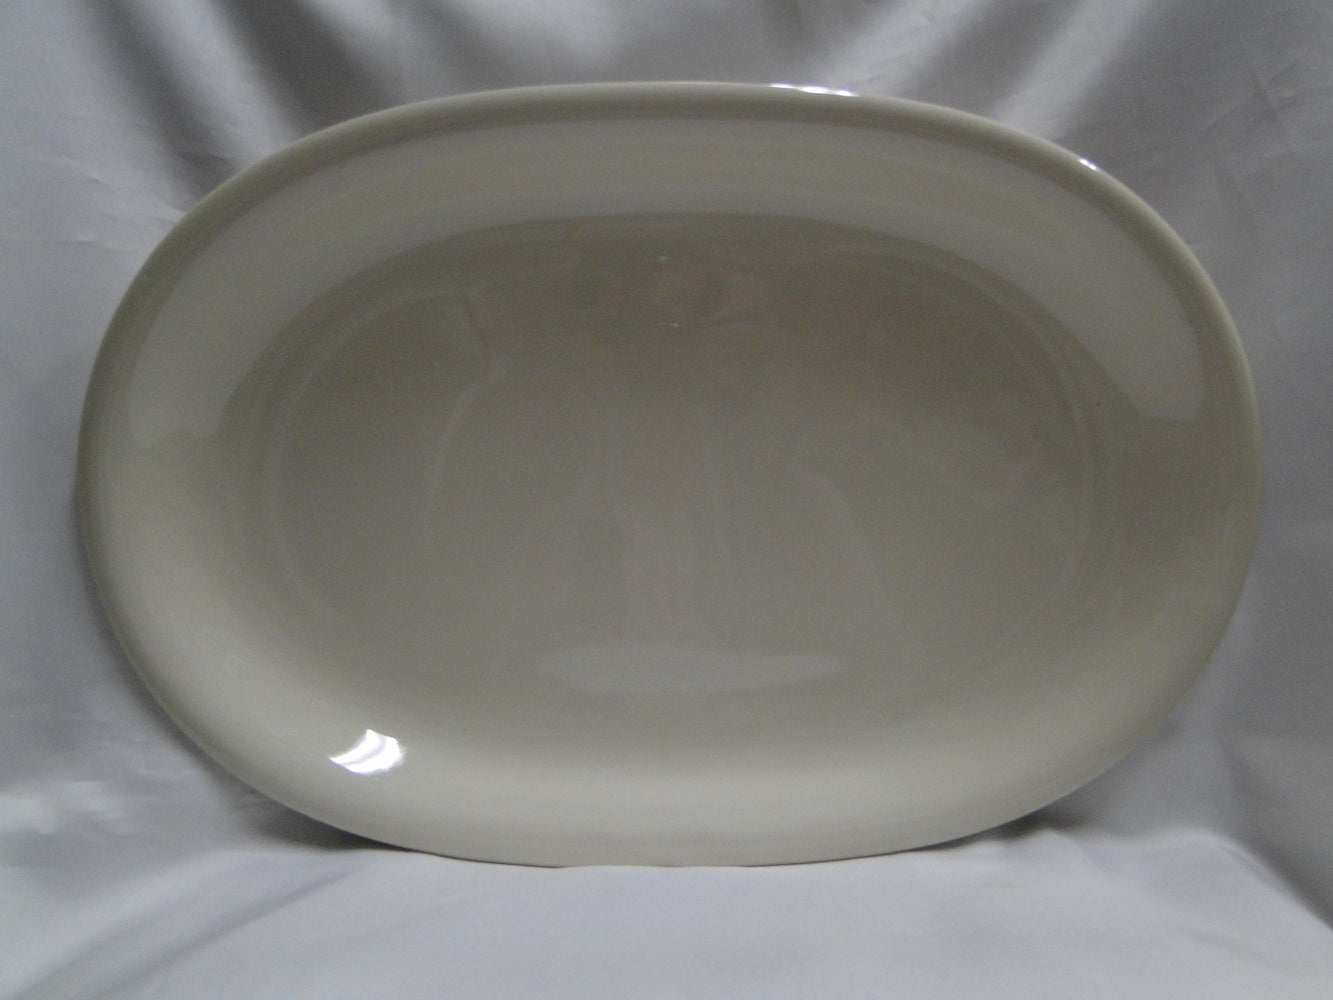 Hutschenreuther Turvel, All Cream, No Trim: Oval Serving Platter, 15 1/4", As Is